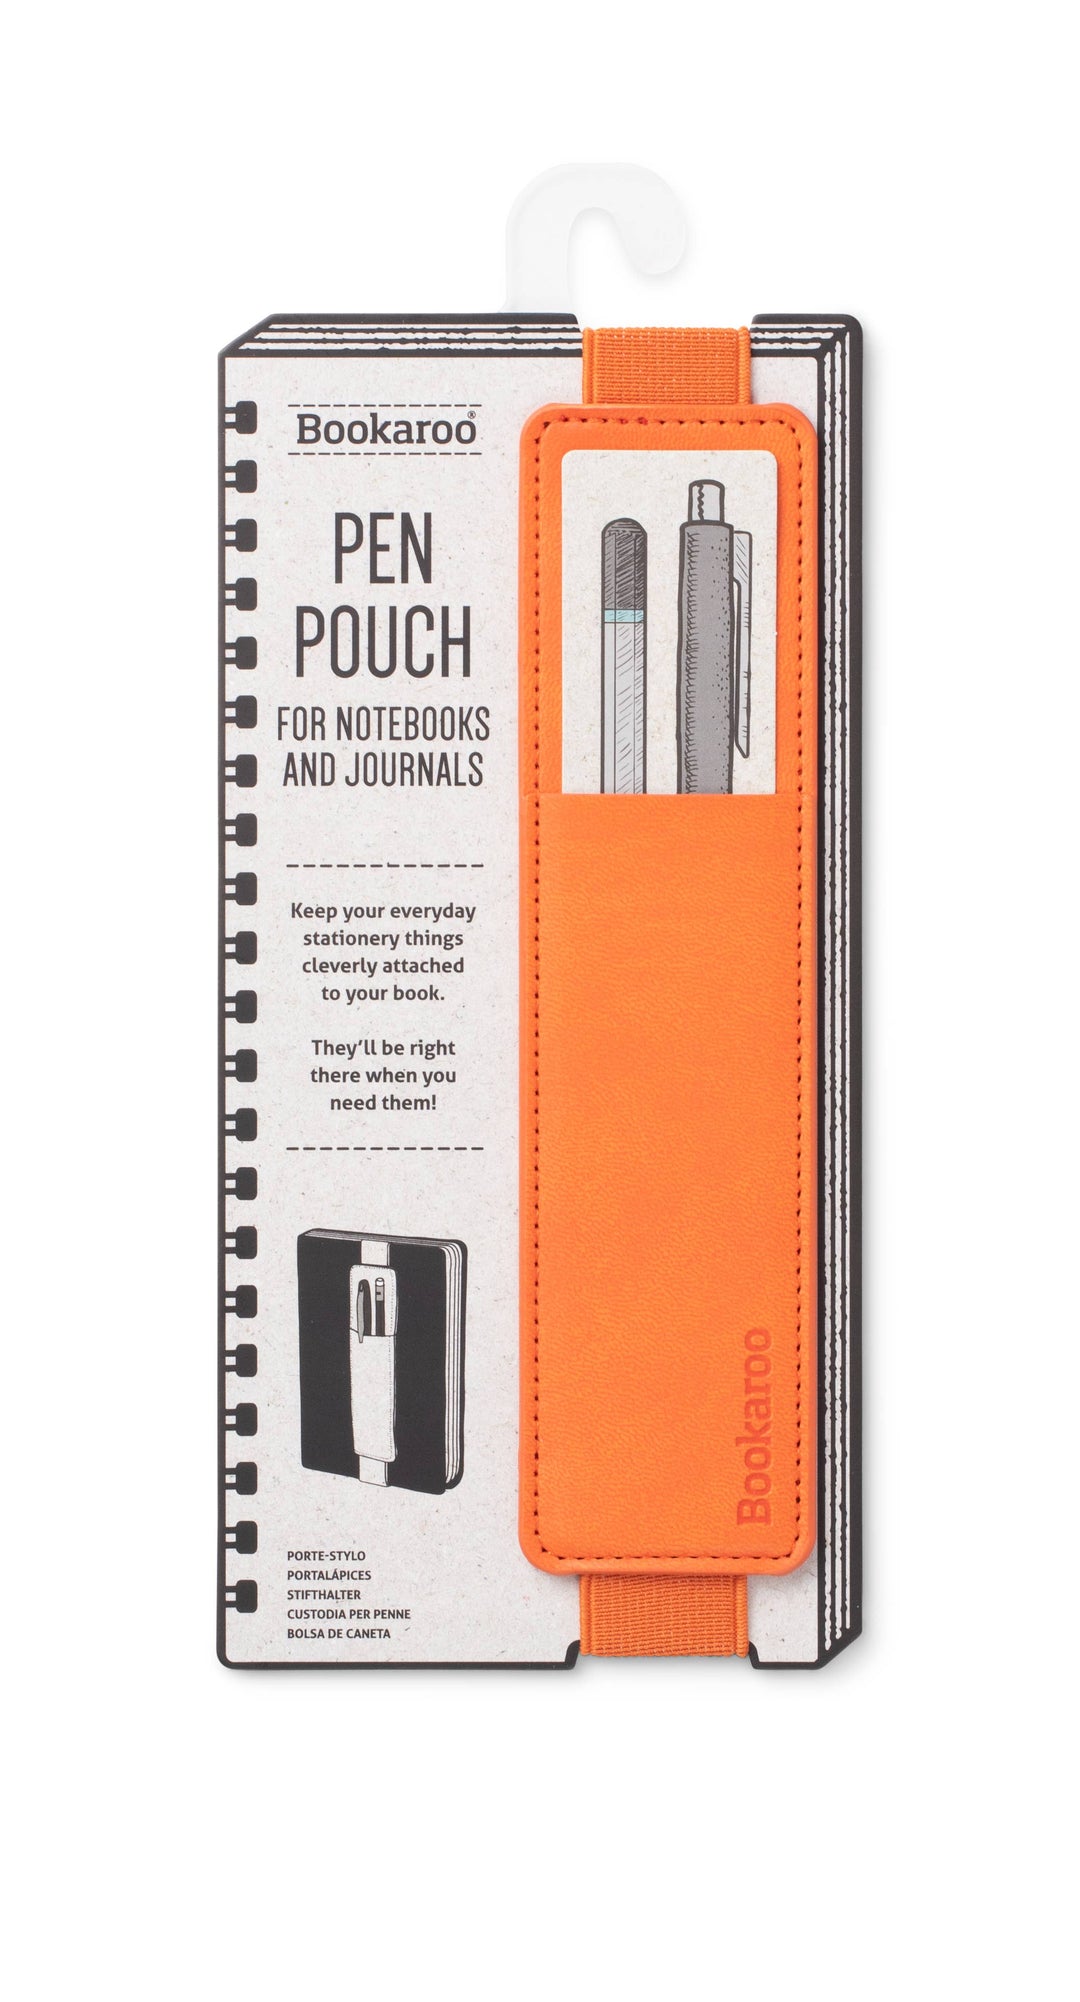 if USA - Bookaroo Pen Pouch: Turquoise